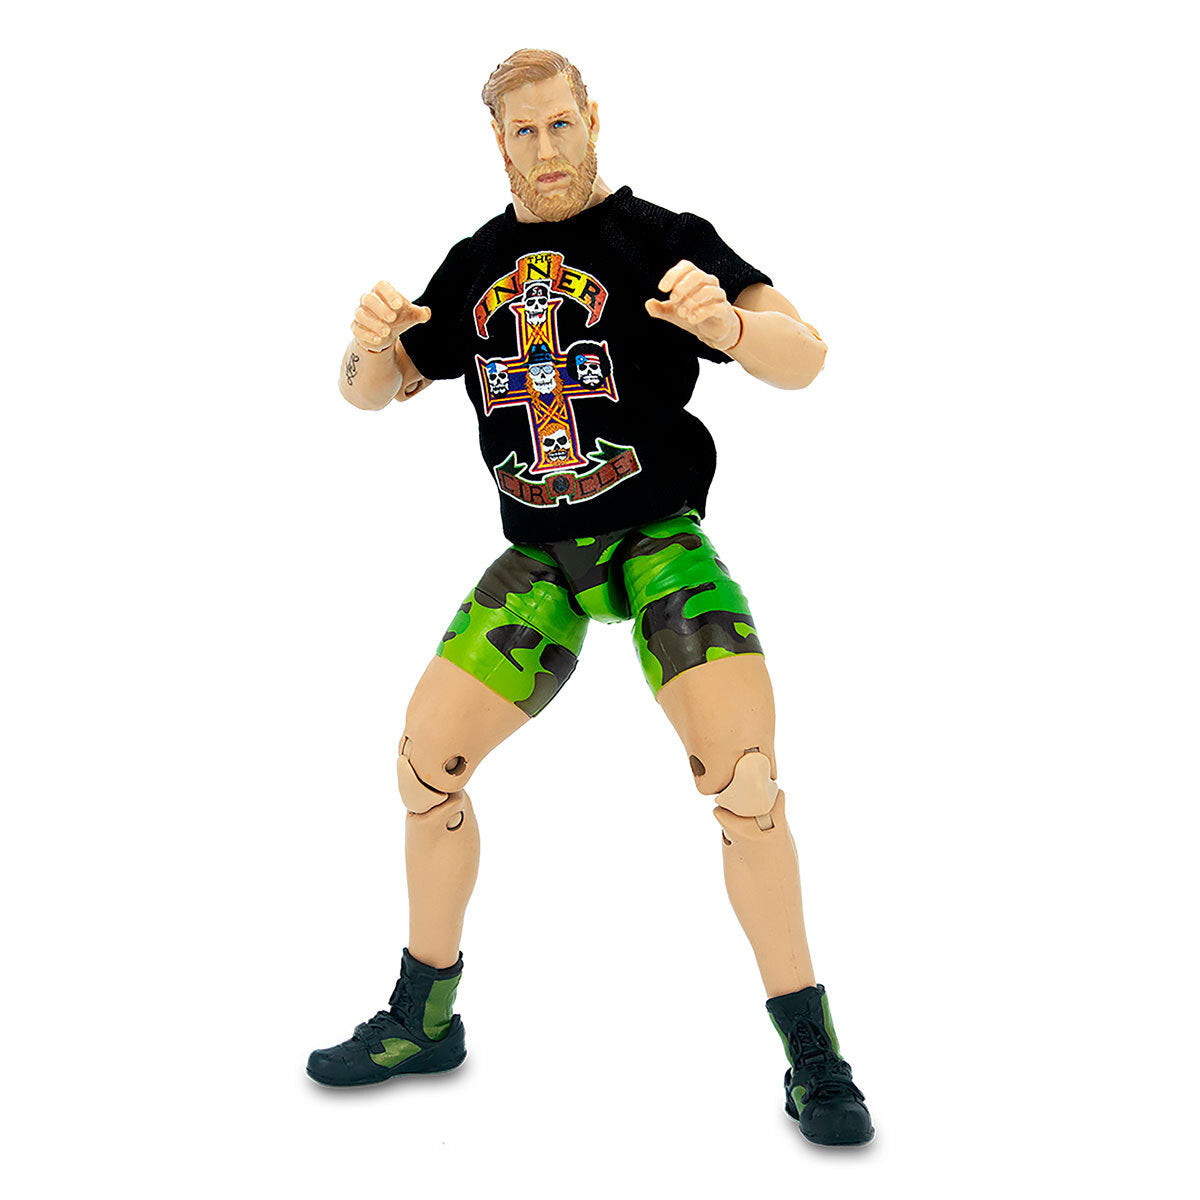 AEW 6.5' Unrivaled Collection Figure - Jake Hager